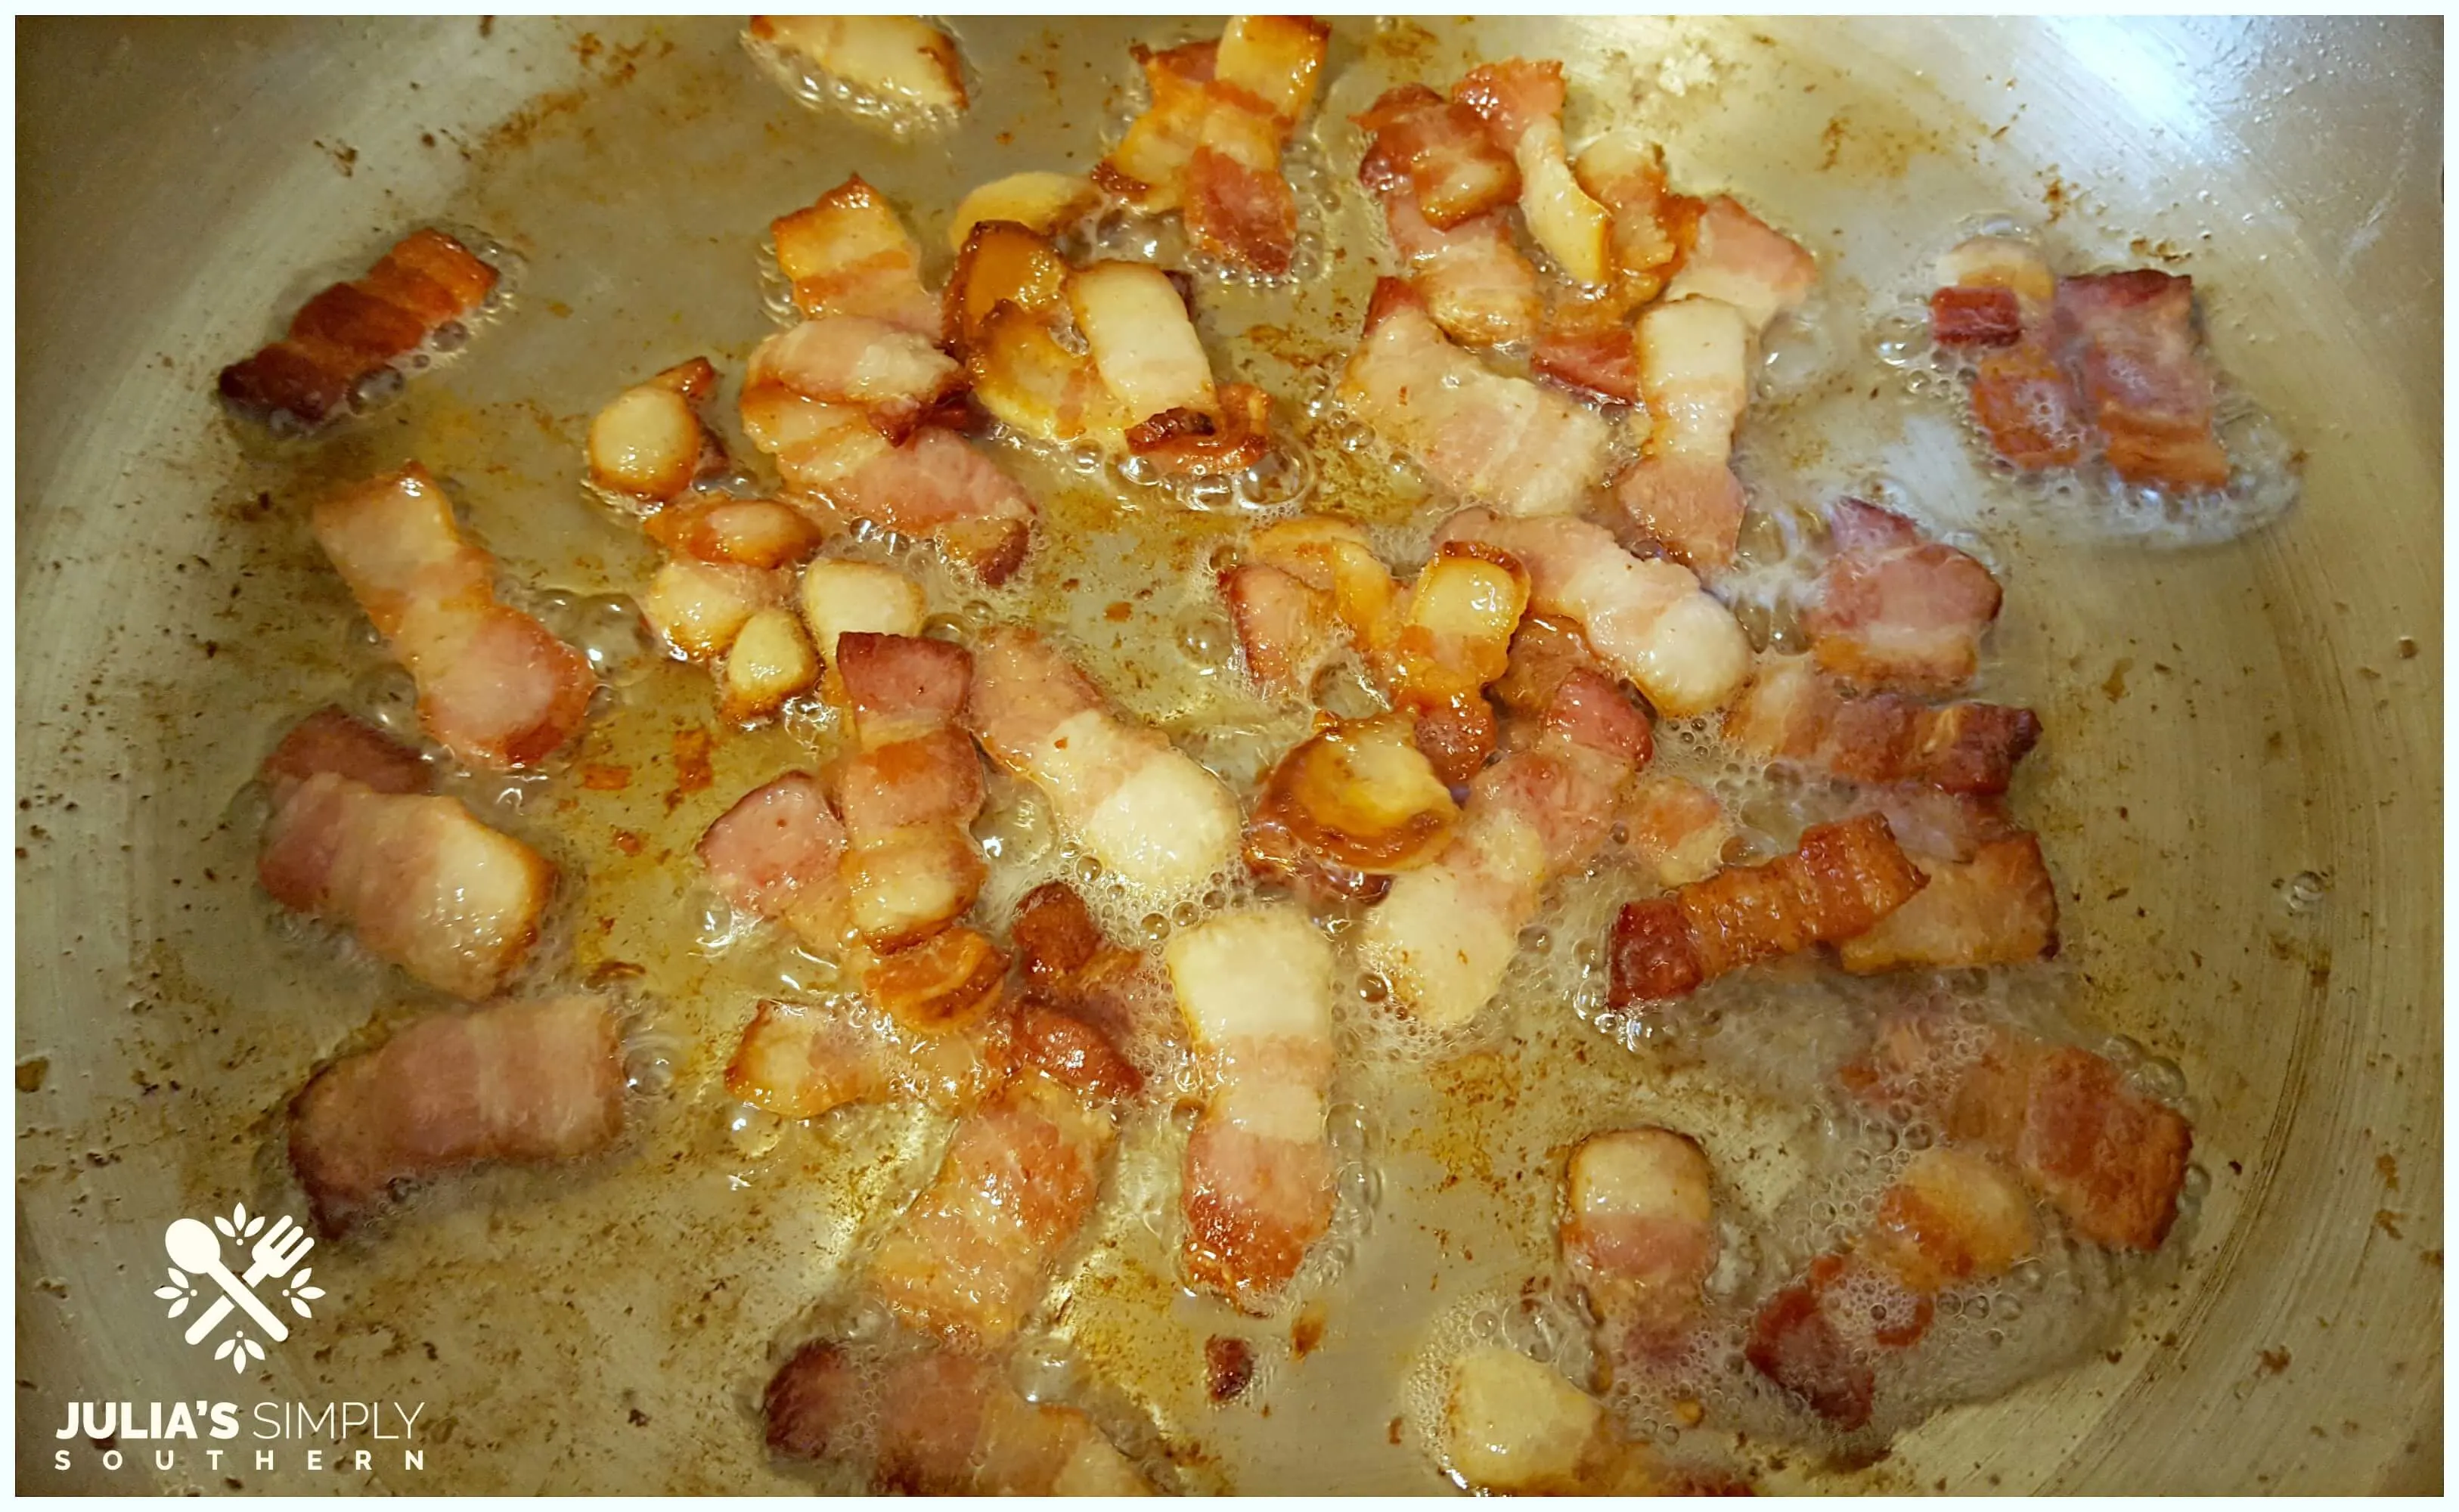 Saute bacon to render drippings in a Biltmore cookware pan